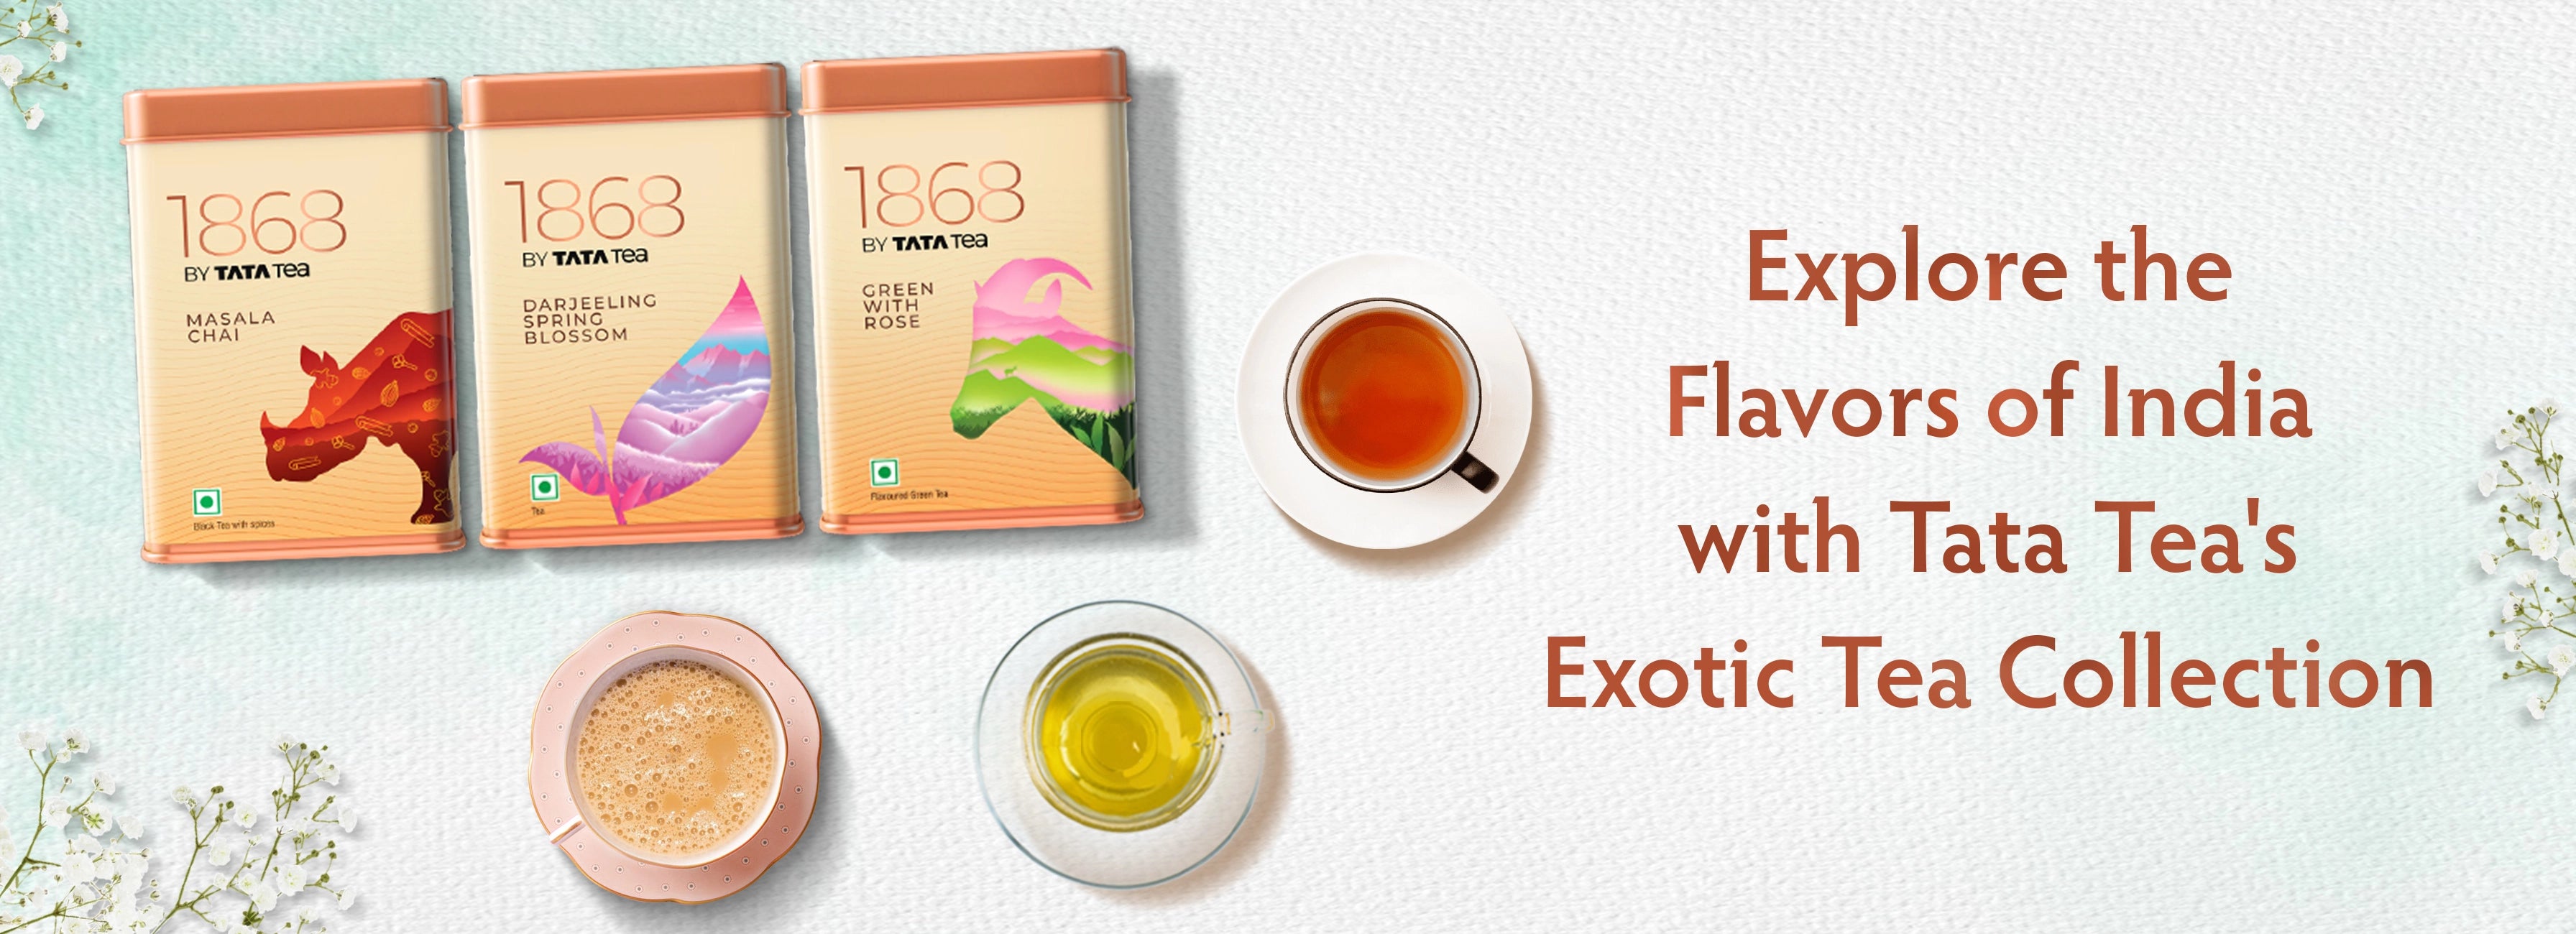 Explore the Flavors of India with Tata Tea's Exotic Tea Collection